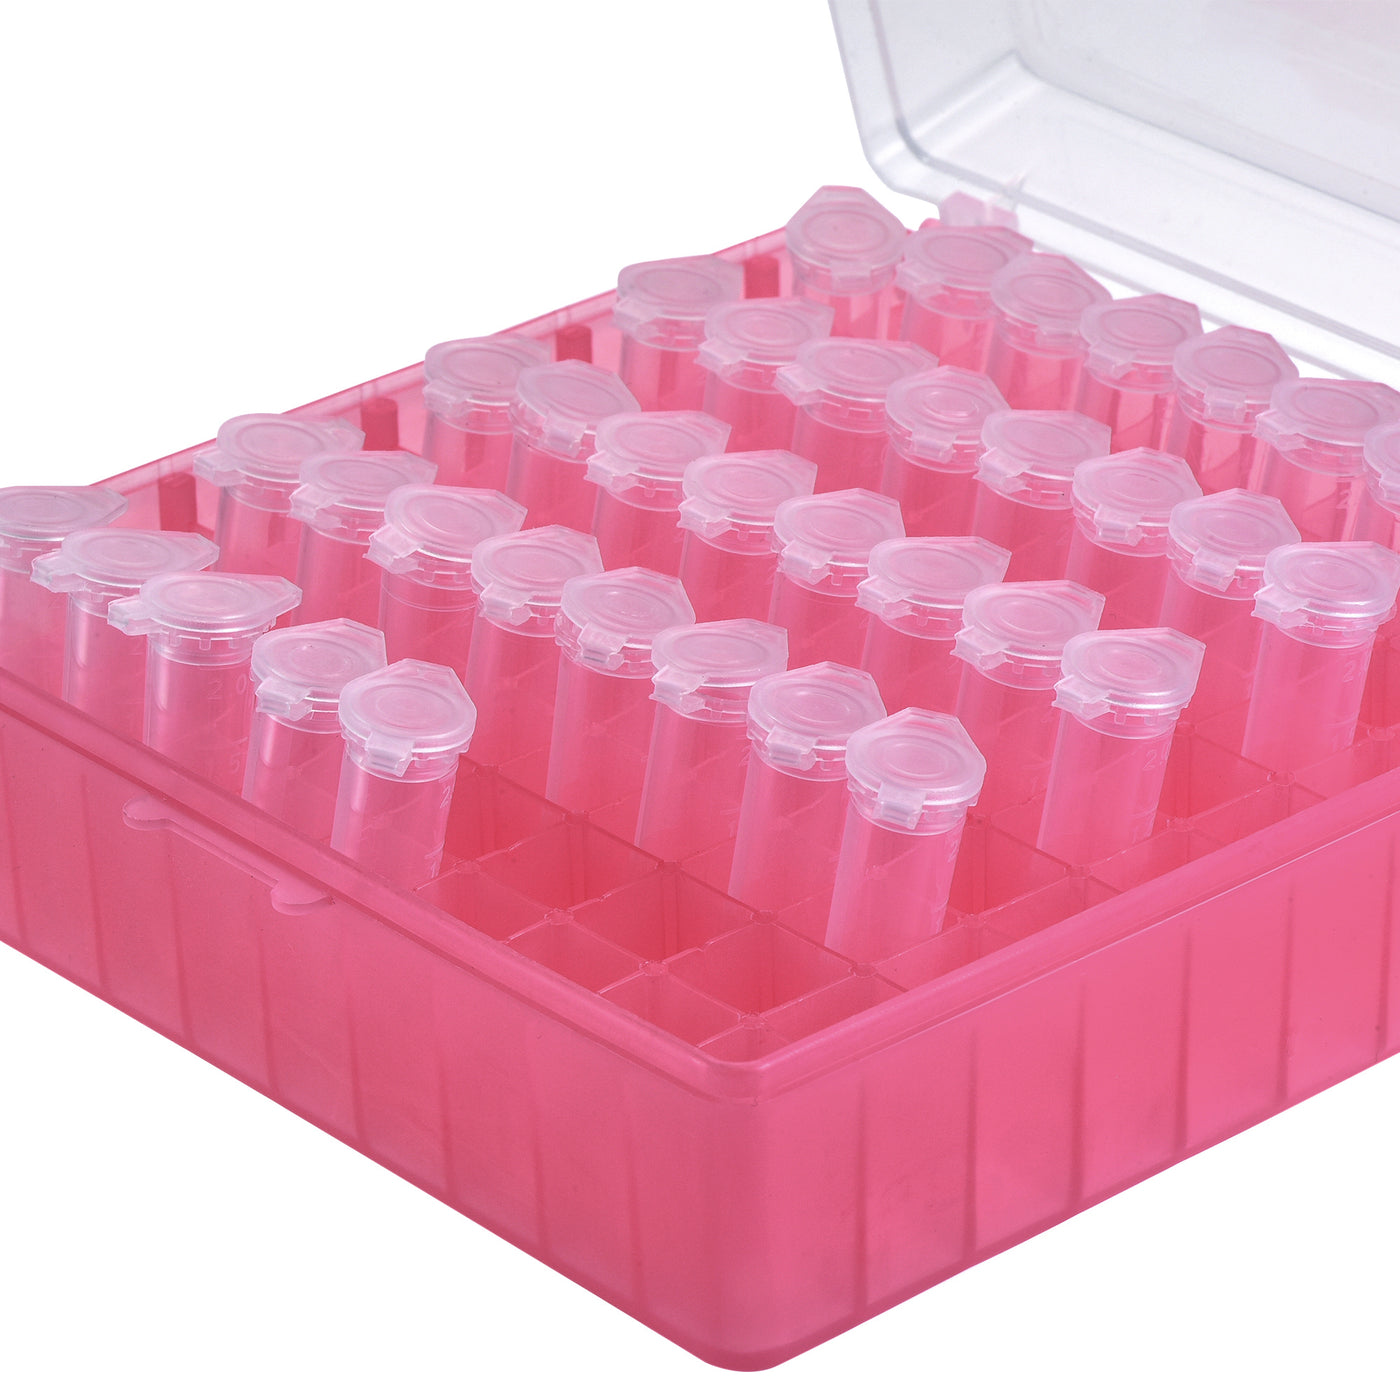 uxcell Uxcell Freezer Tube Box 100 Places Polypropylene Plastic Lockable Holder Rack for 1.5/1.8/2ml Microcentrifuge Tubes, Red